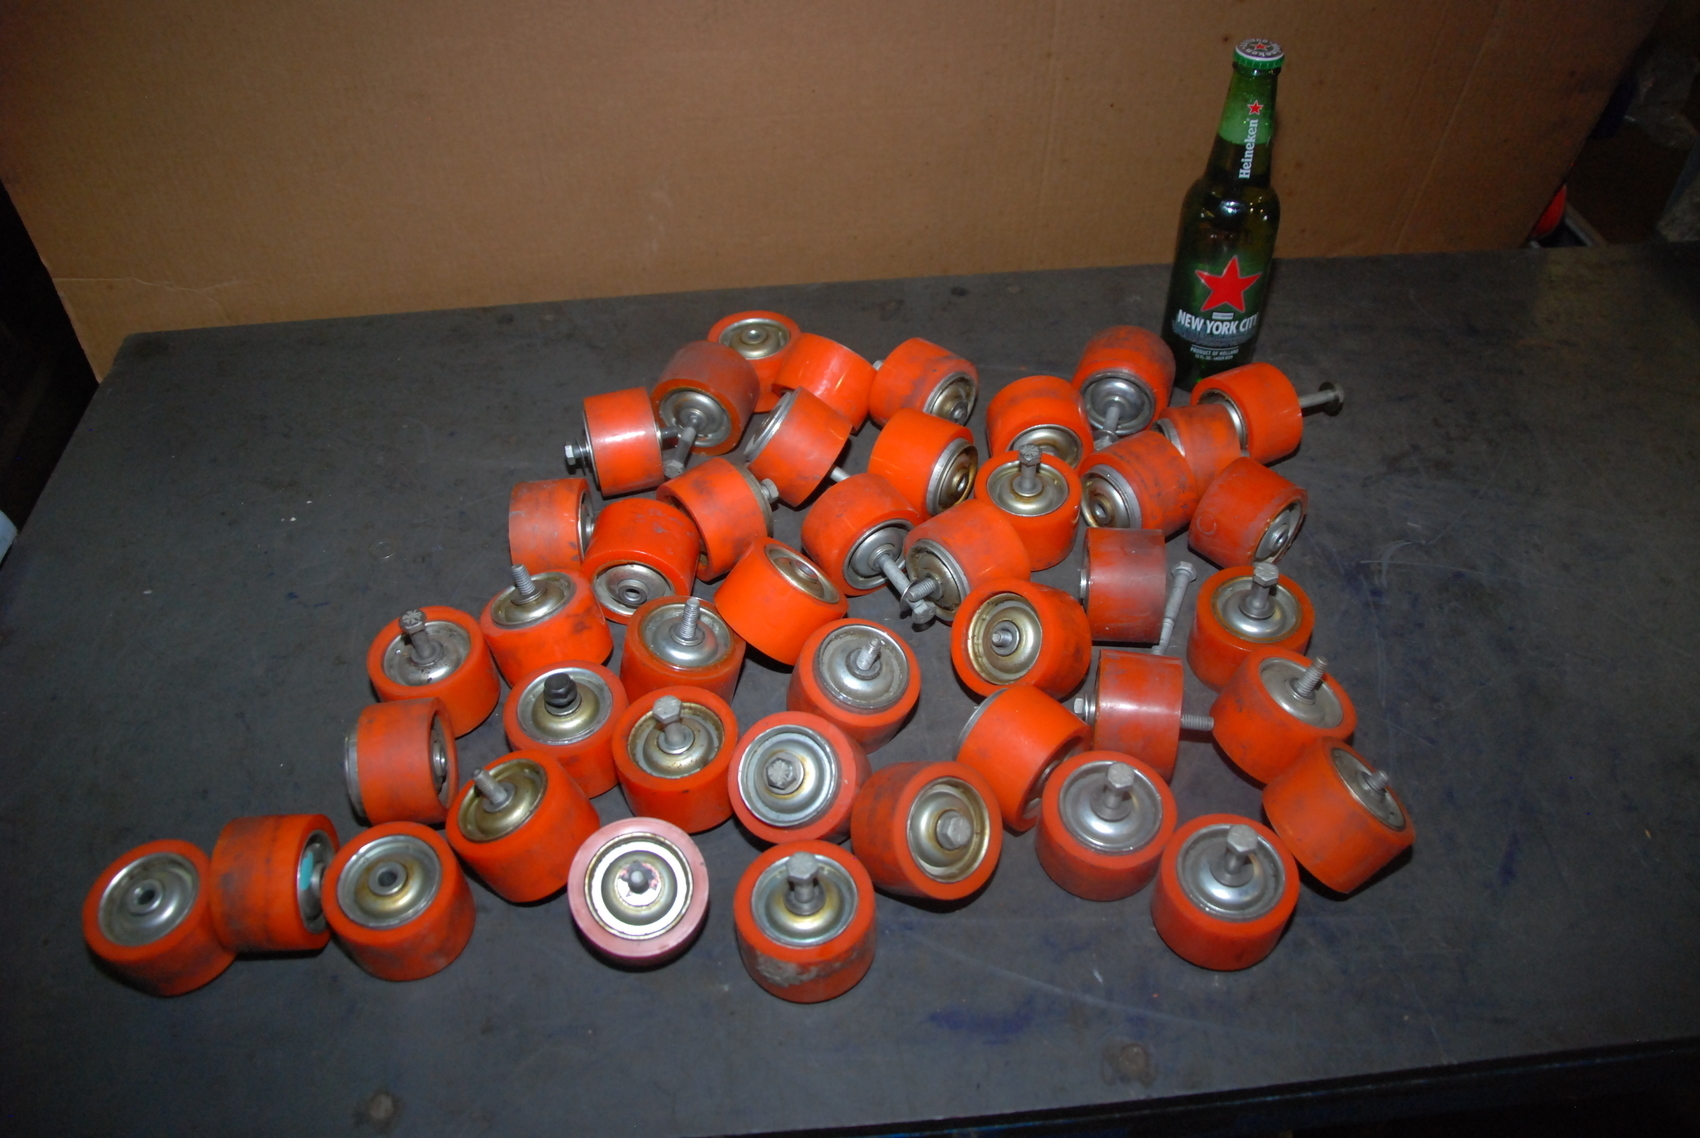 Lot of 44 PEER T-5799 urethane rubber conveyor feed rollers